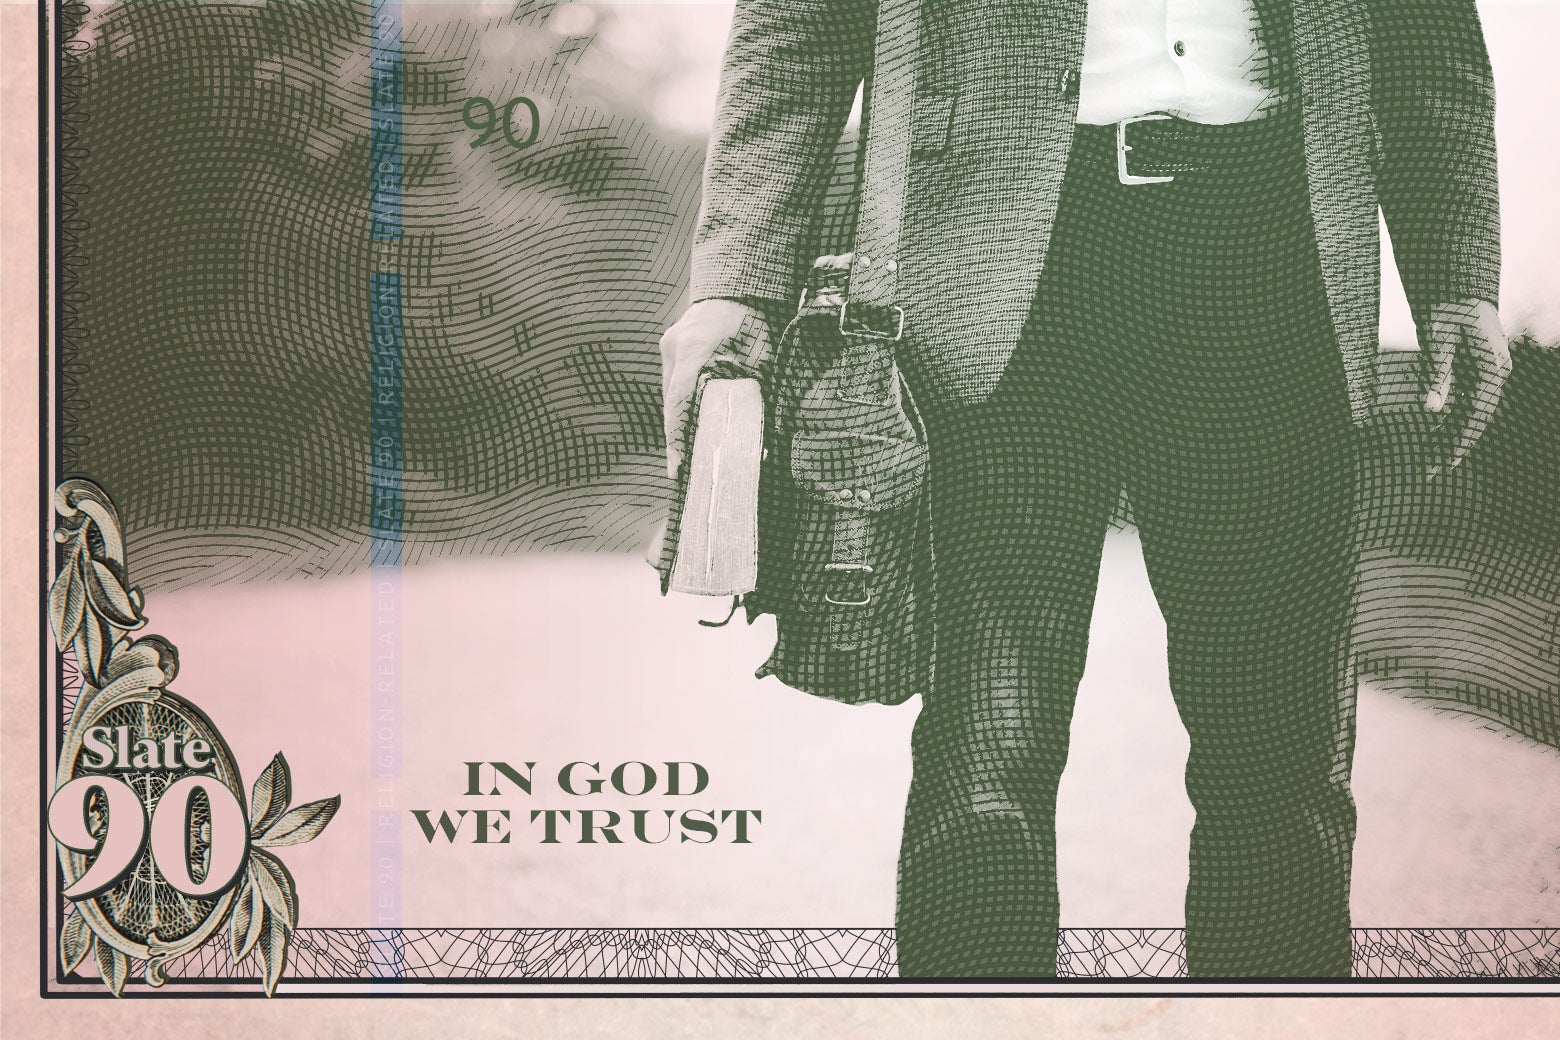 Paper currency showing a man walking with a bible.